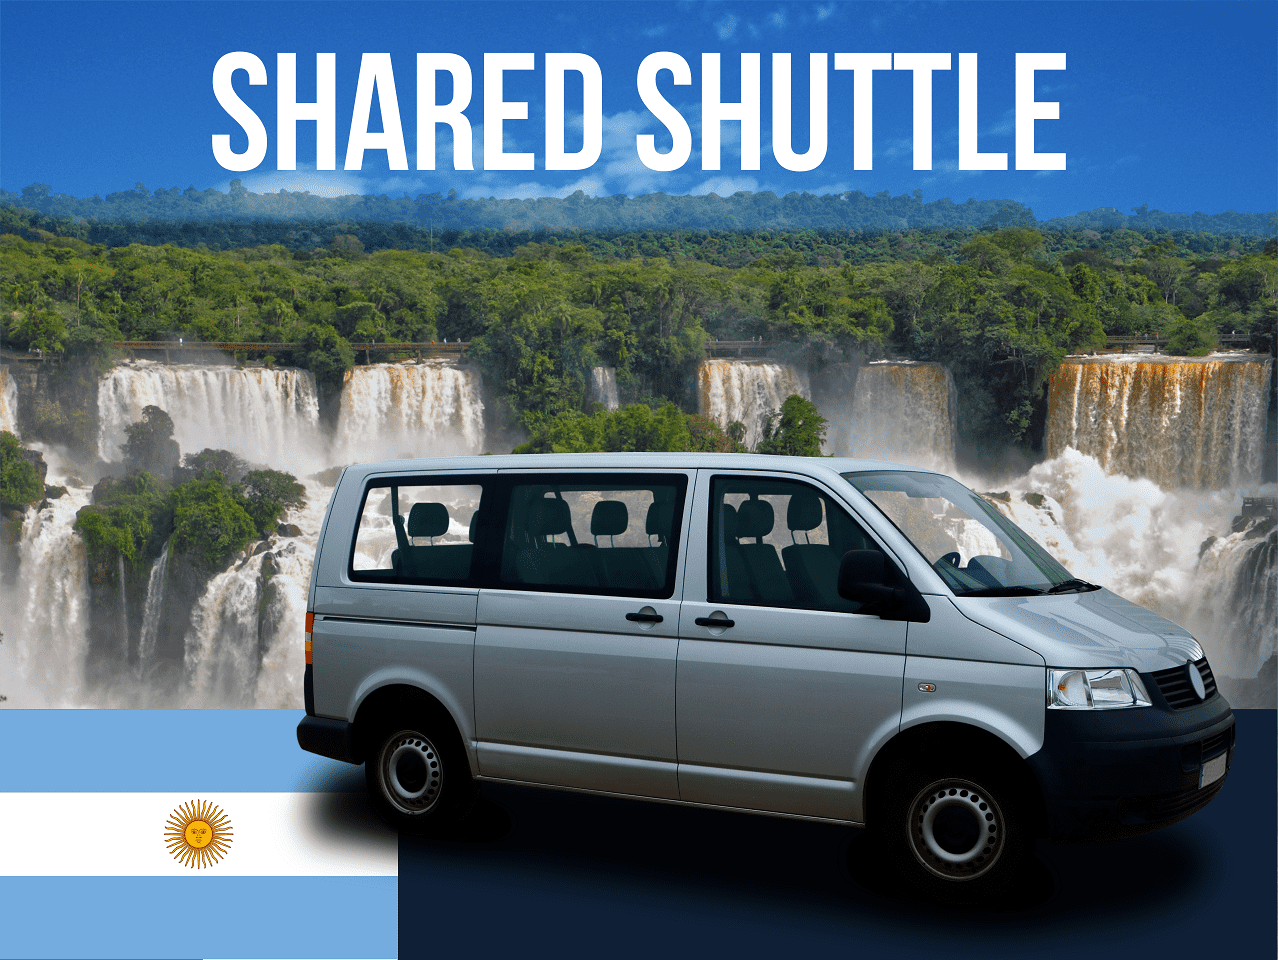 Shuttle from Foz do Iguacu to the Argentine side of the falls